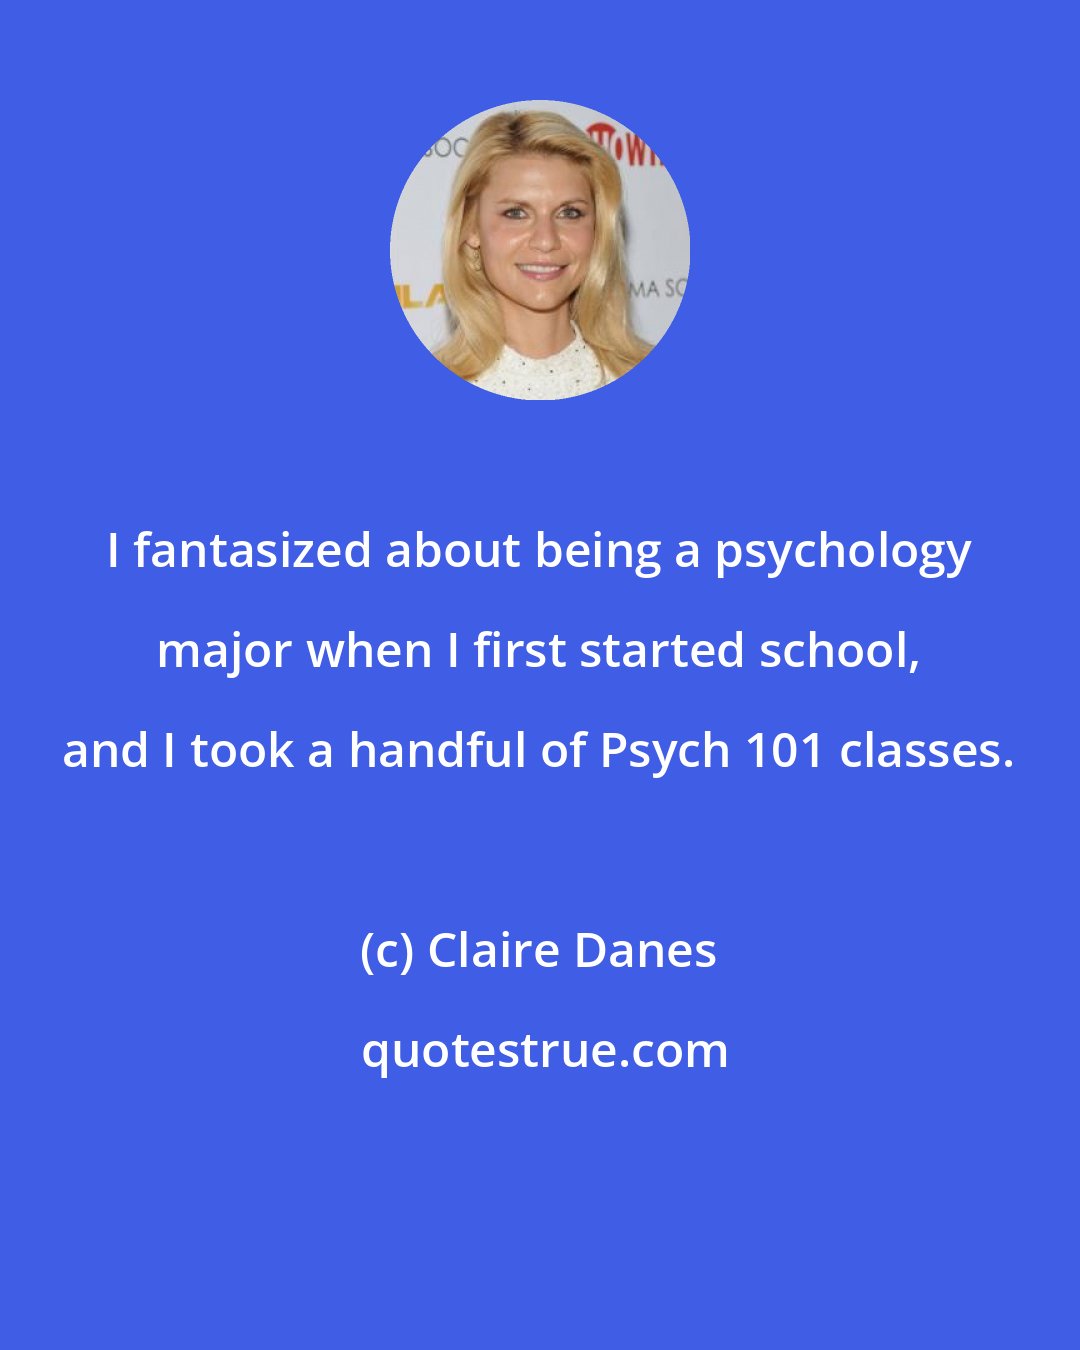 Claire Danes: I fantasized about being a psychology major when I first started school, and I took a handful of Psych 101 classes.